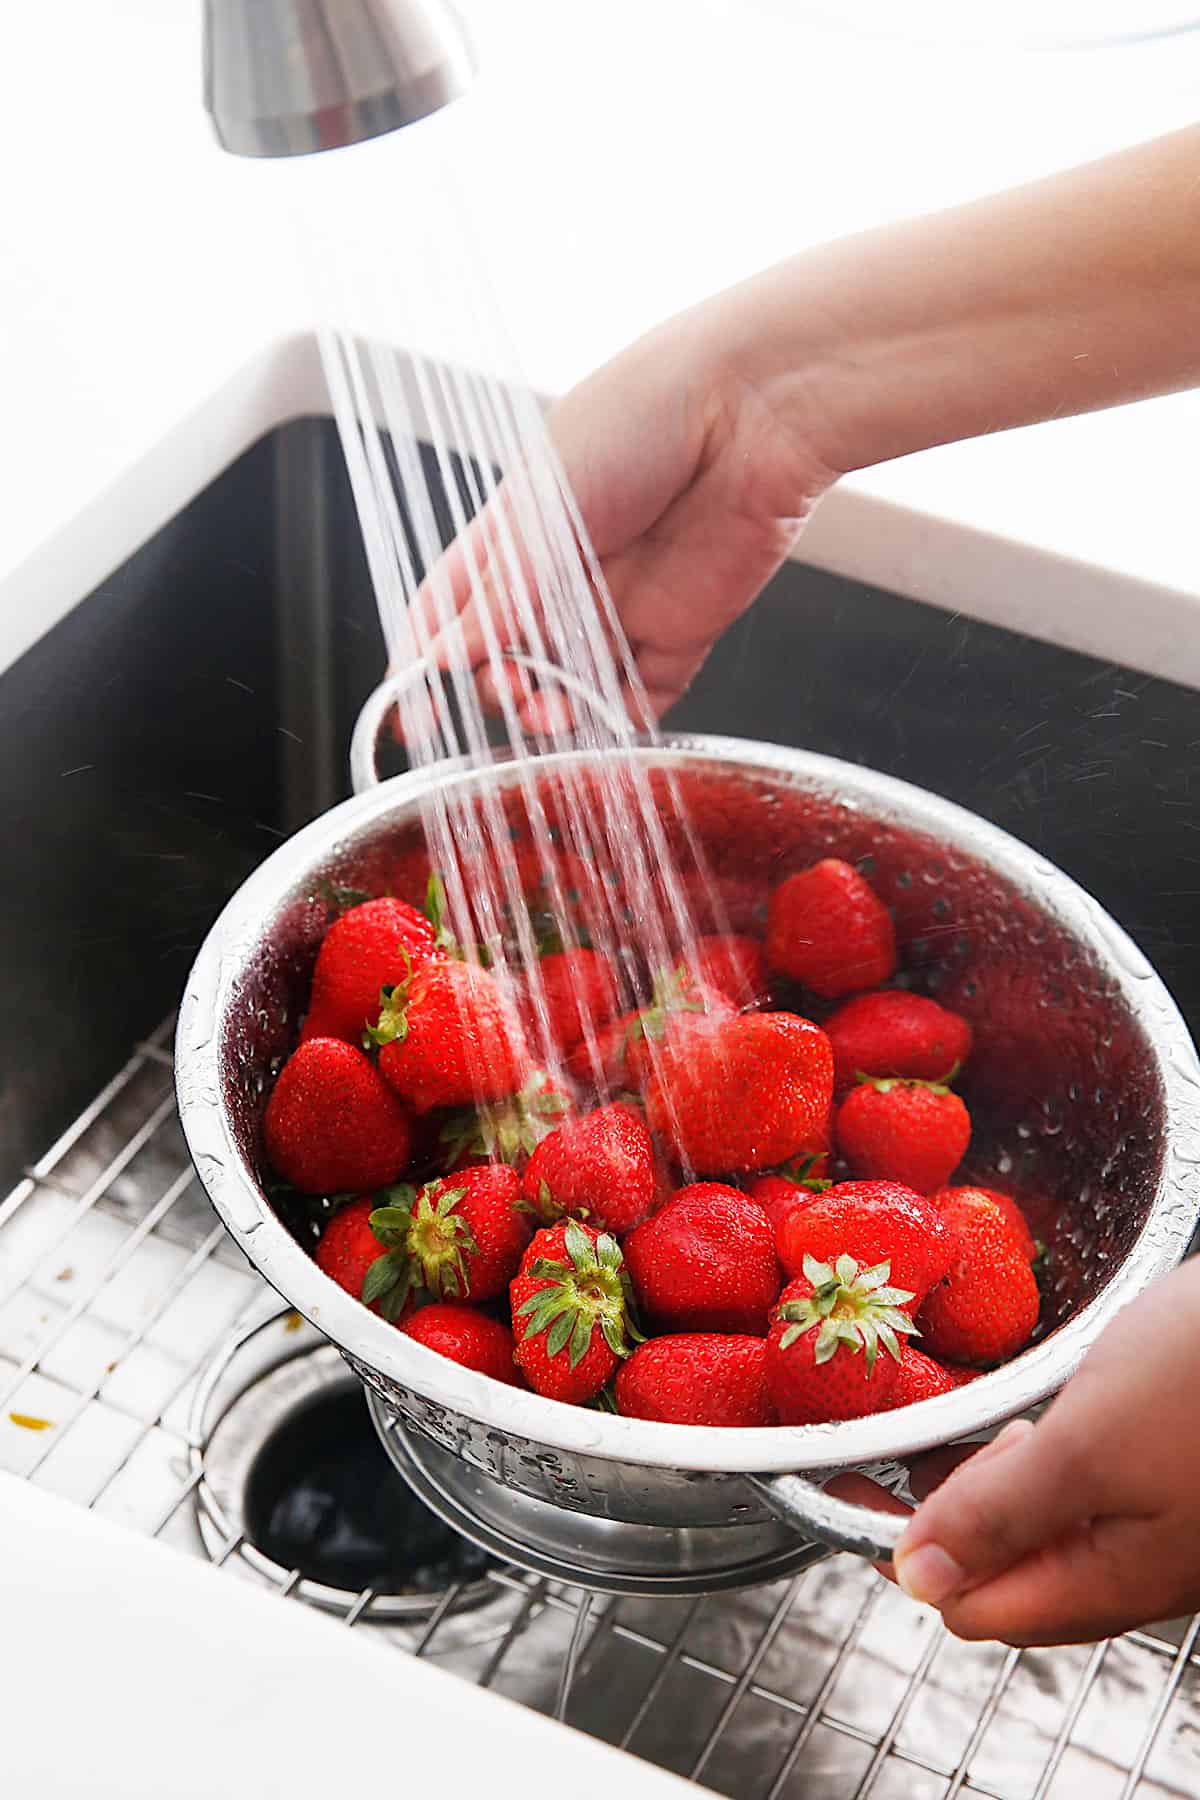 How to Clean Strawberries (So They Last Longer)!